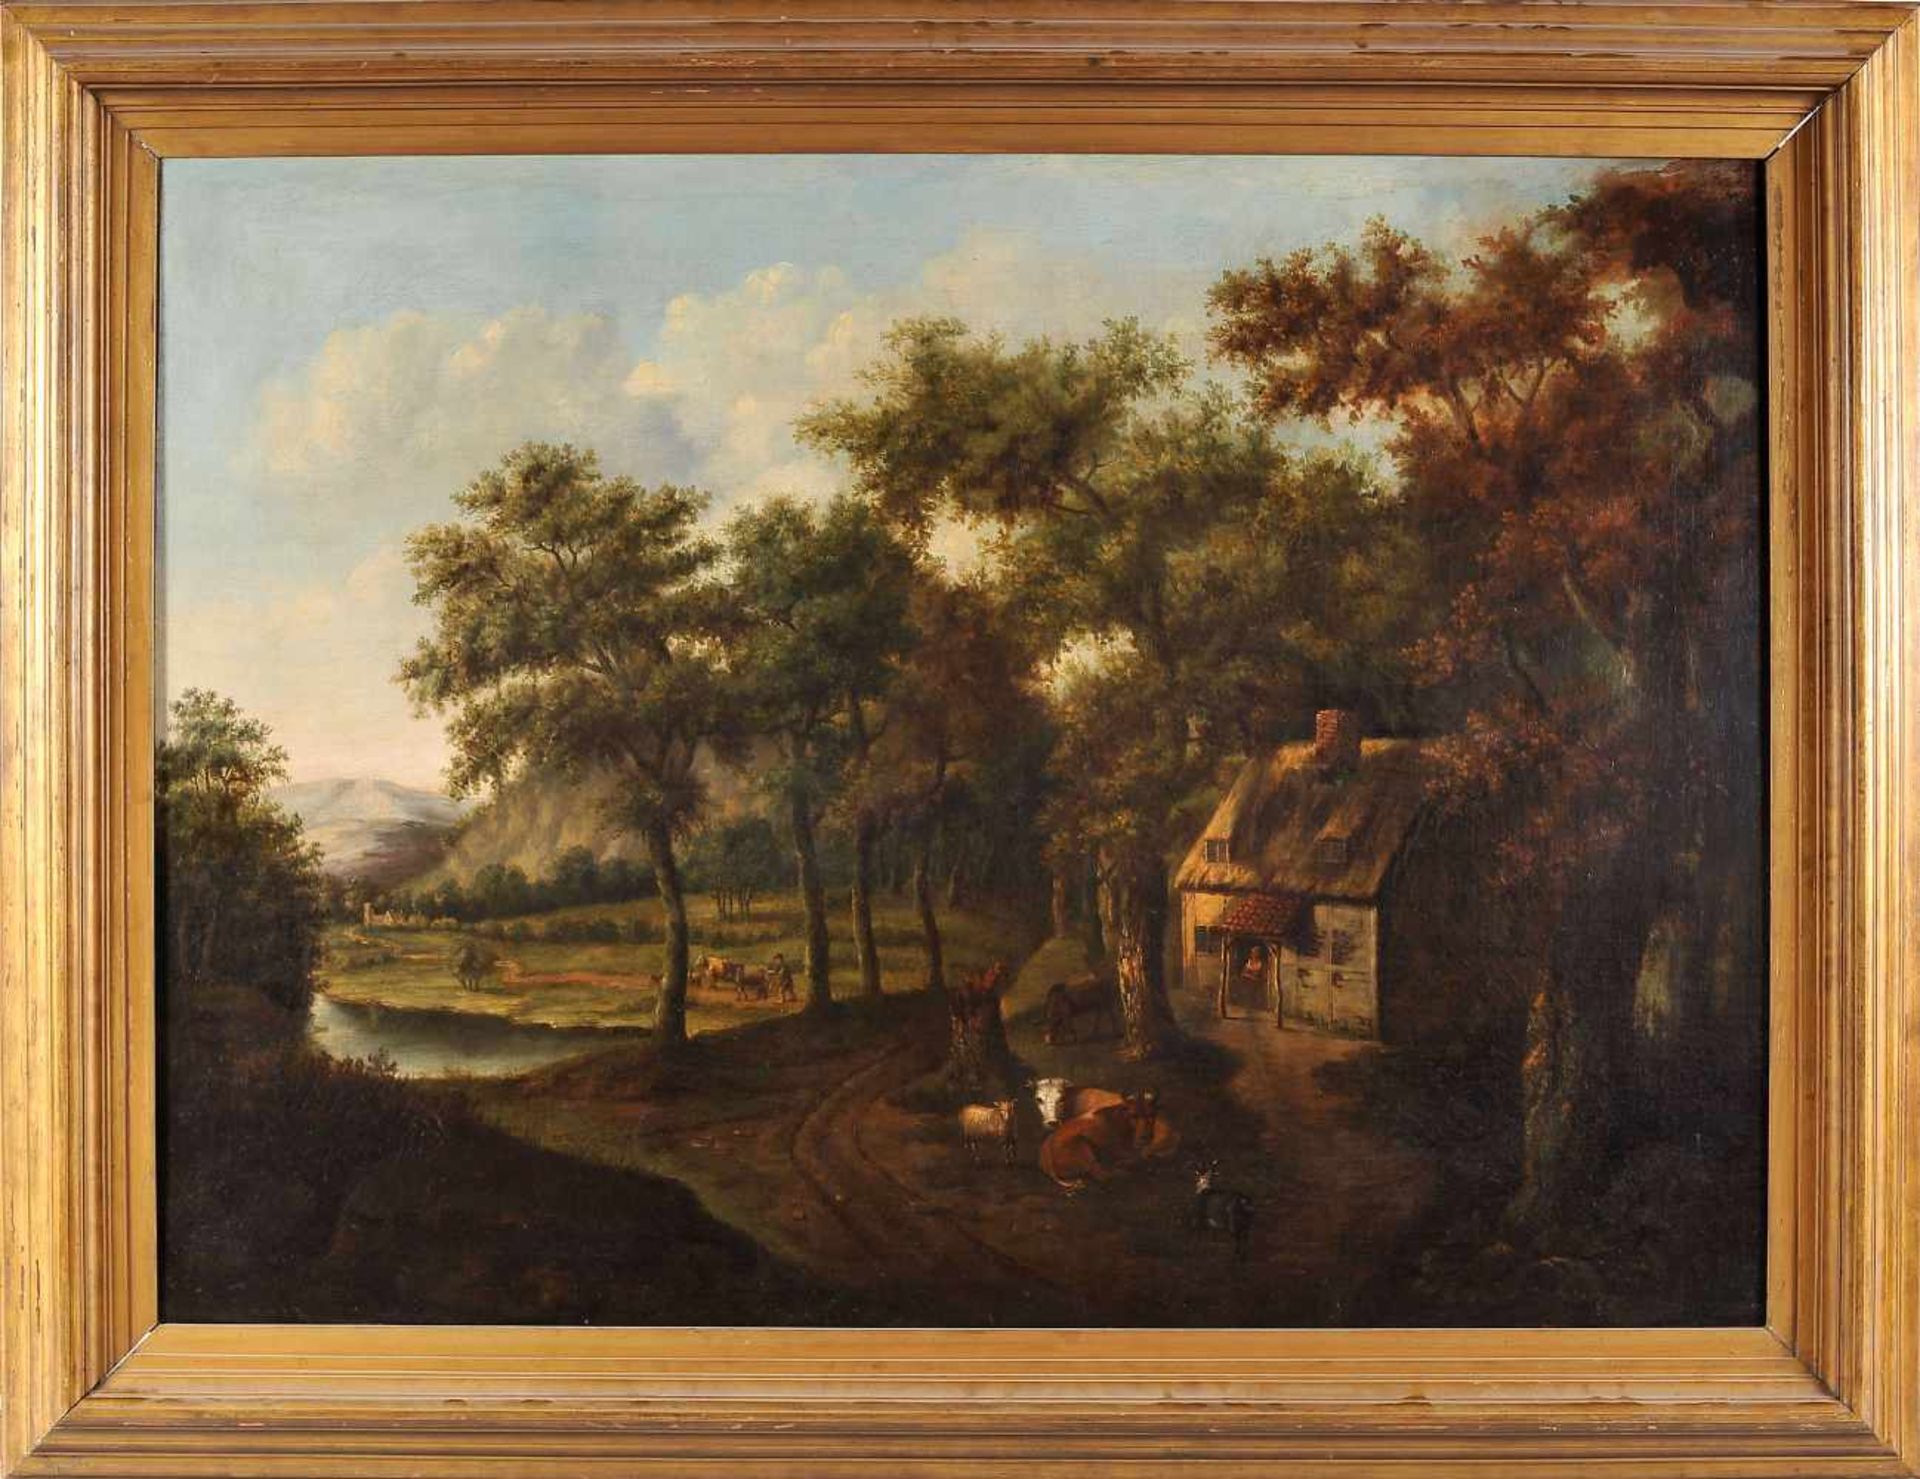 Landscape with house, figures and livestock, oil on canvas, English school, 18th/19th C., reline,